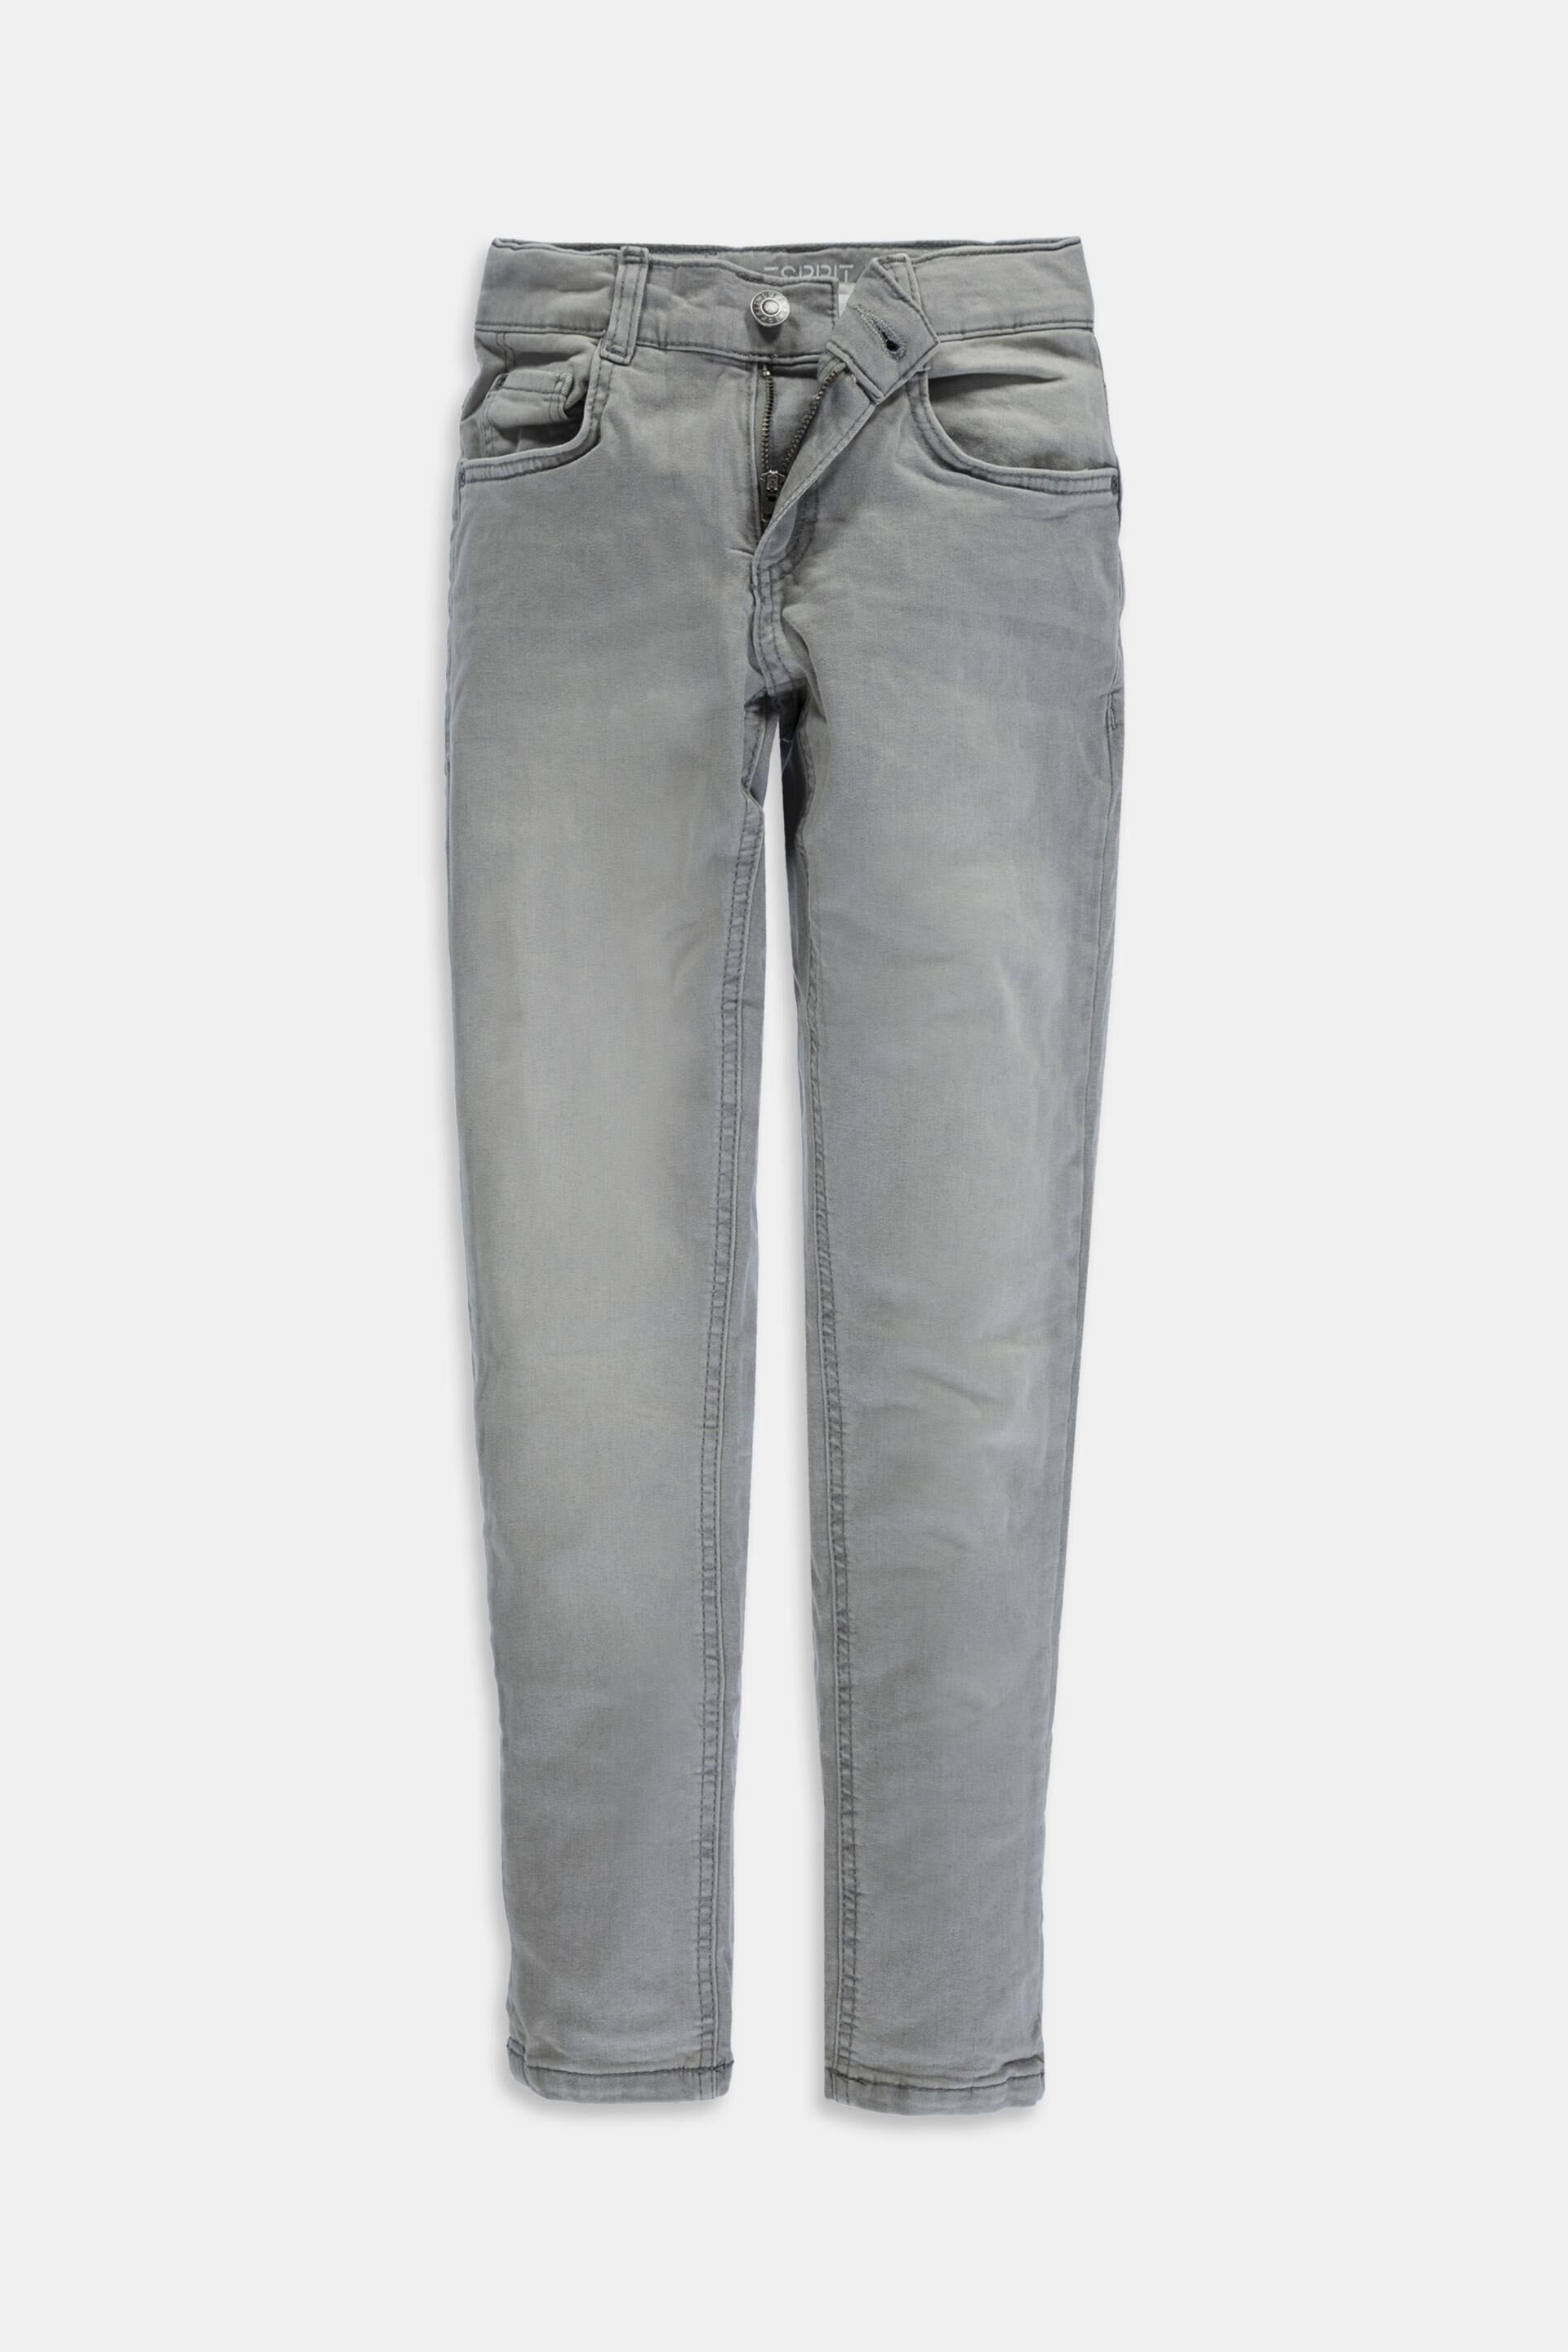 Esprit Jeans with adjustable an waistband